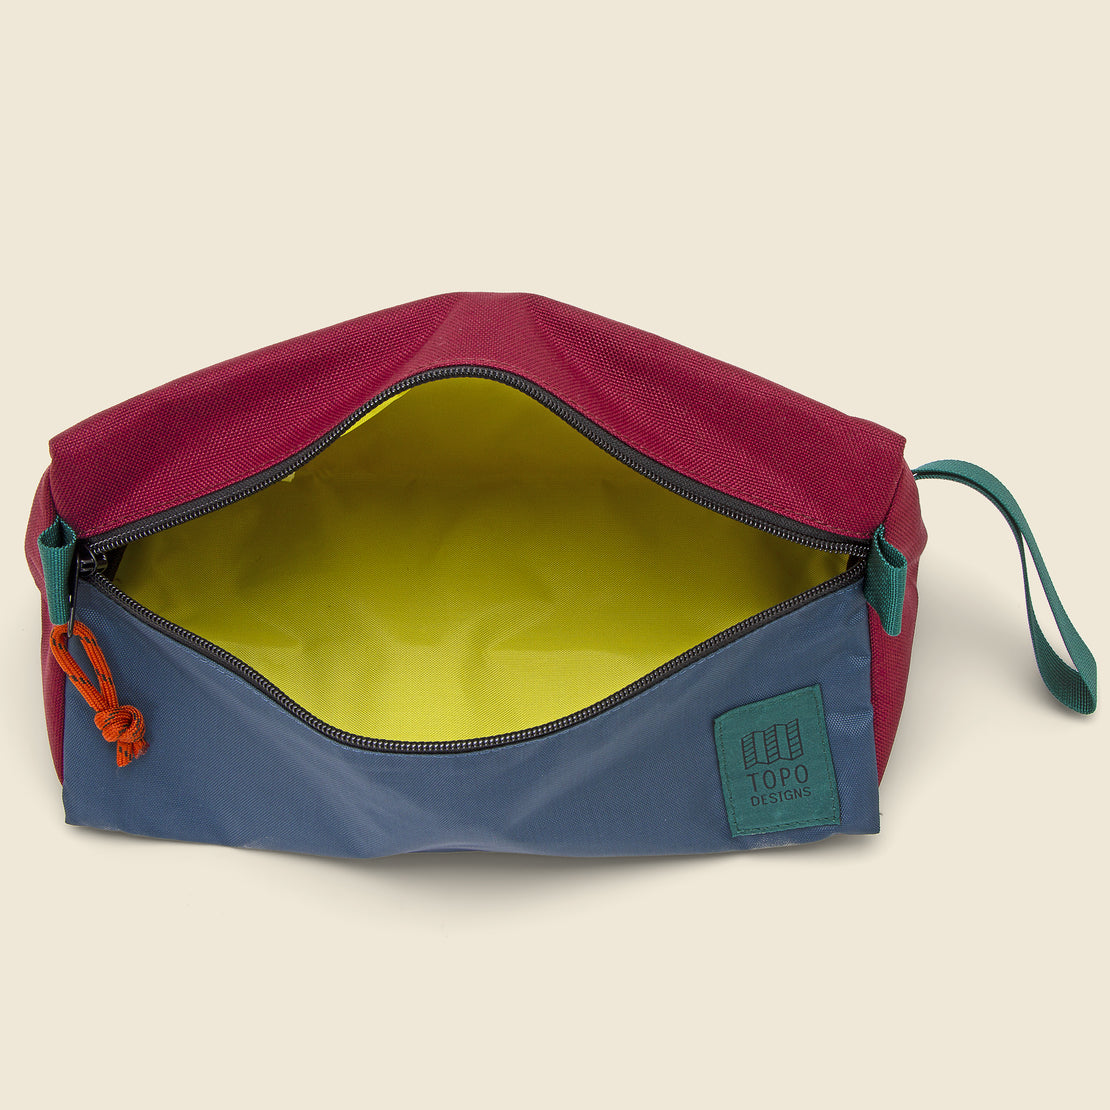 Dopp Kit - Pond Blue/Zinfandel - Topo Designs - STAG Provisions - Accessories - Bags / Luggage